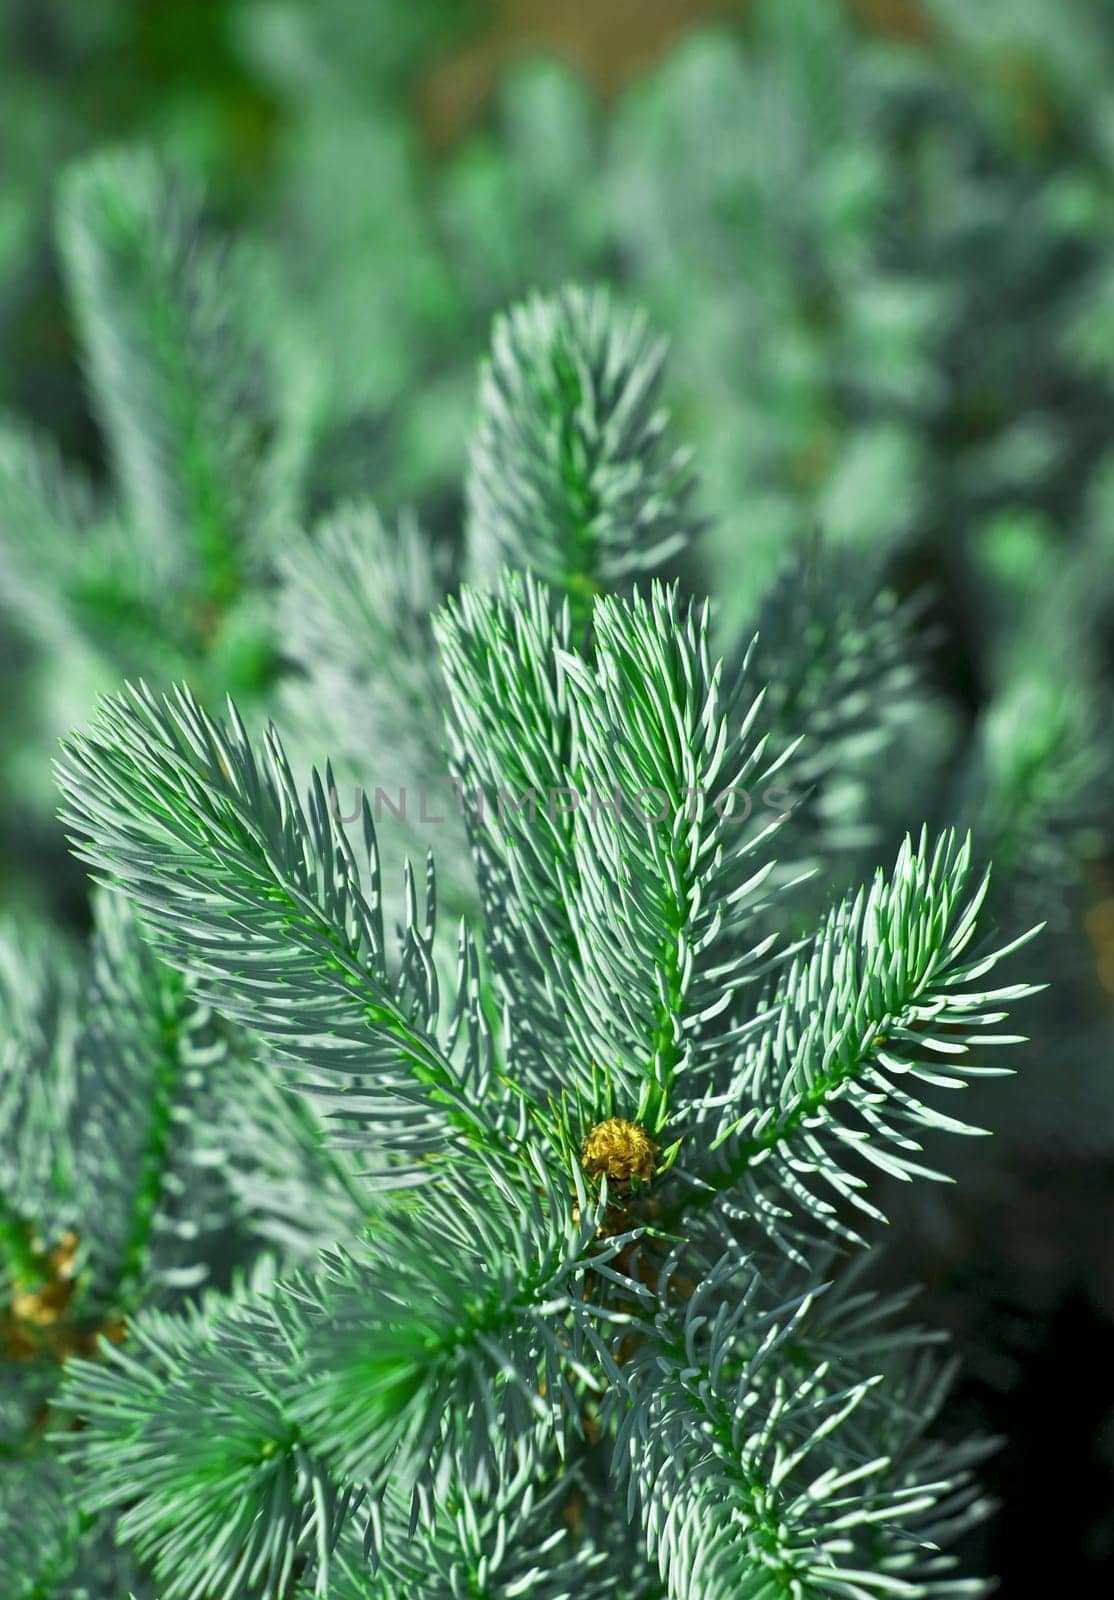 Green prickly branches of a fur-tree or pine. Fluffy fir tree branch close up. background blur by aprilphoto